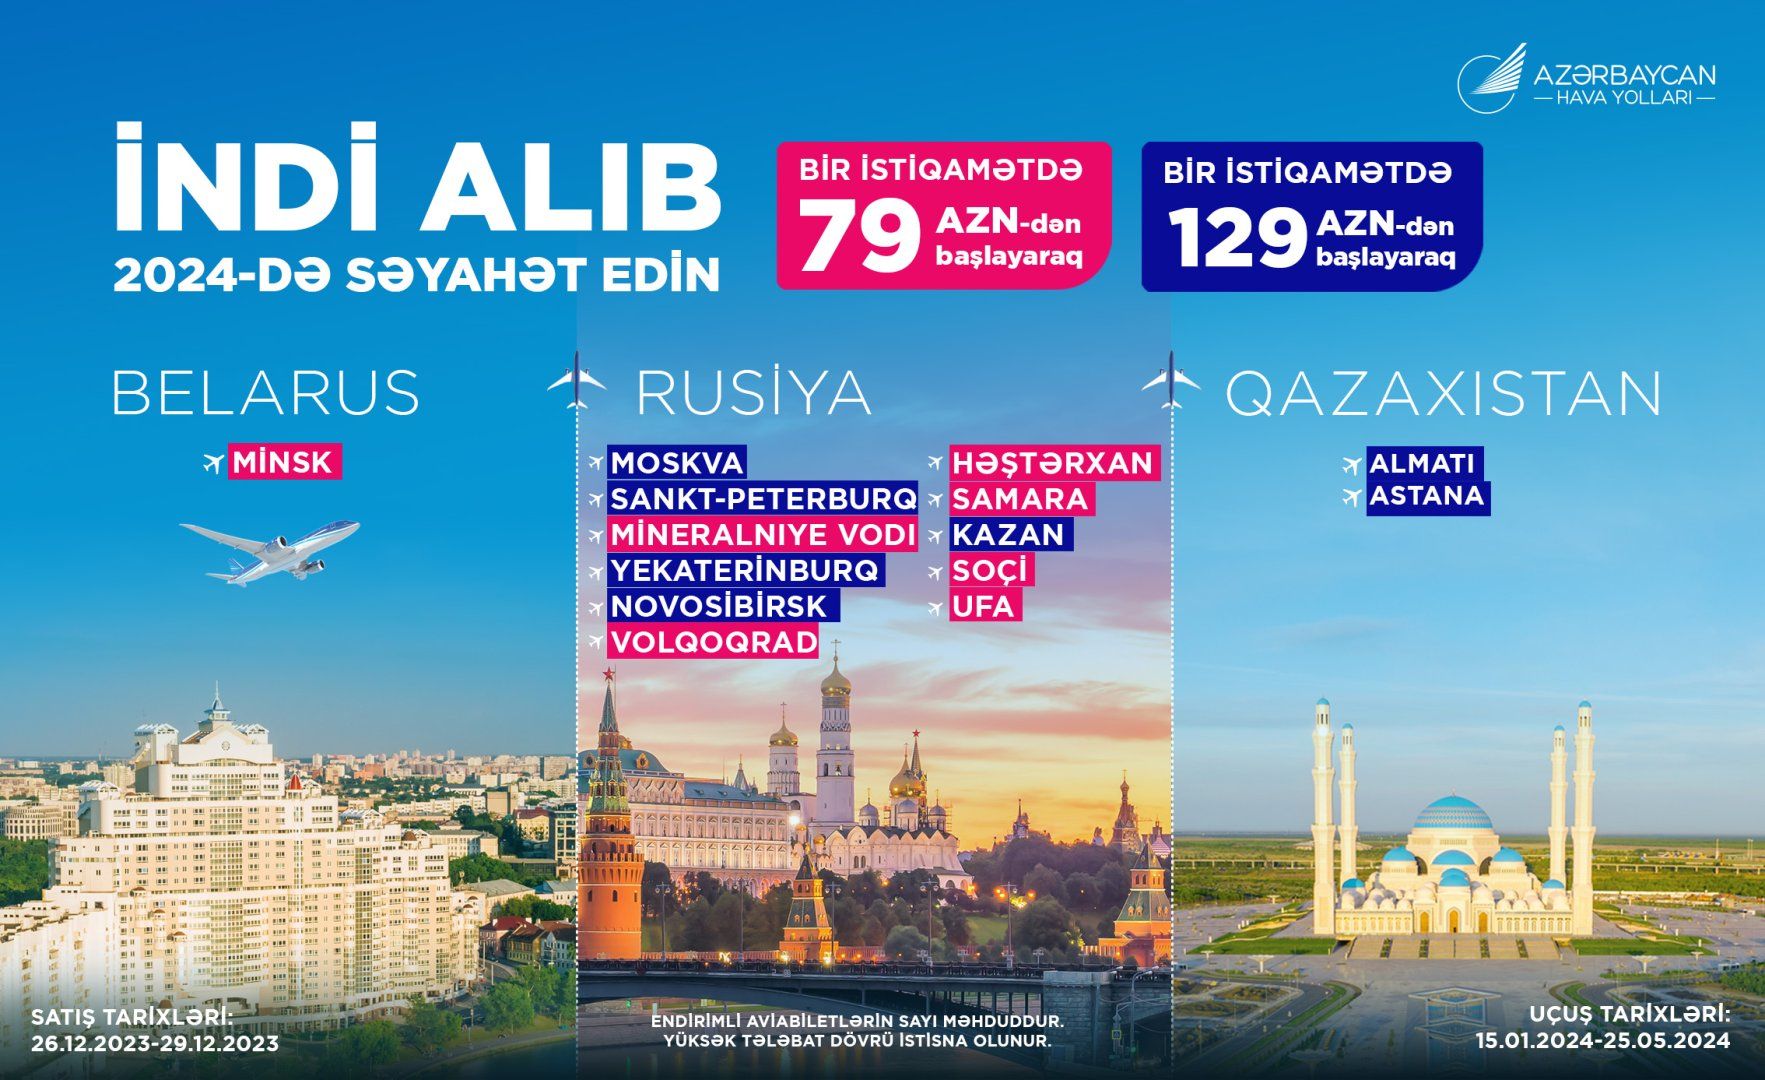 Special offer from AZAL: discounts on multiple destinations